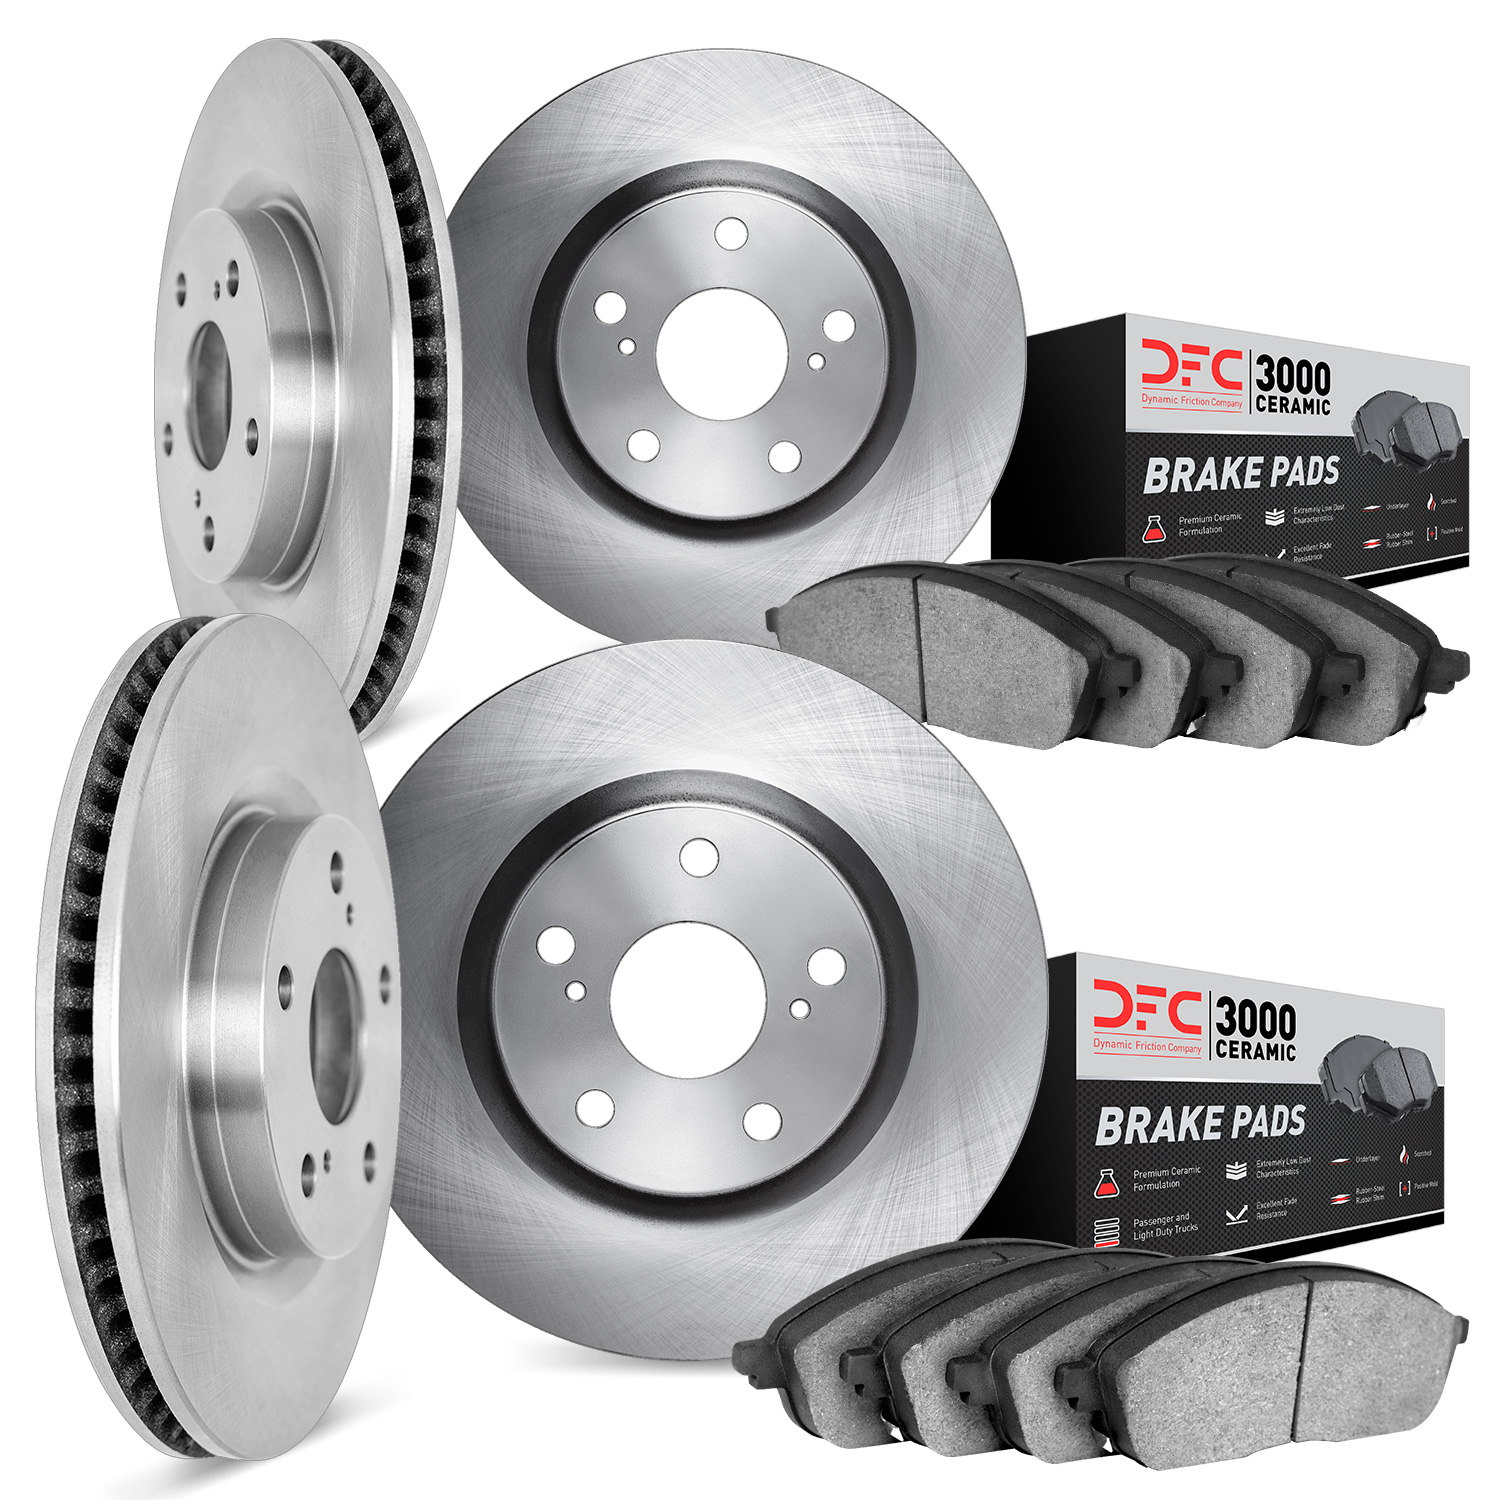 6304-76071 Brake Rotors with 3000-Series Ceramic Brake Pads Kit, 2010-2013 Lexus/Toyota/Scion, Position: Front and Rear